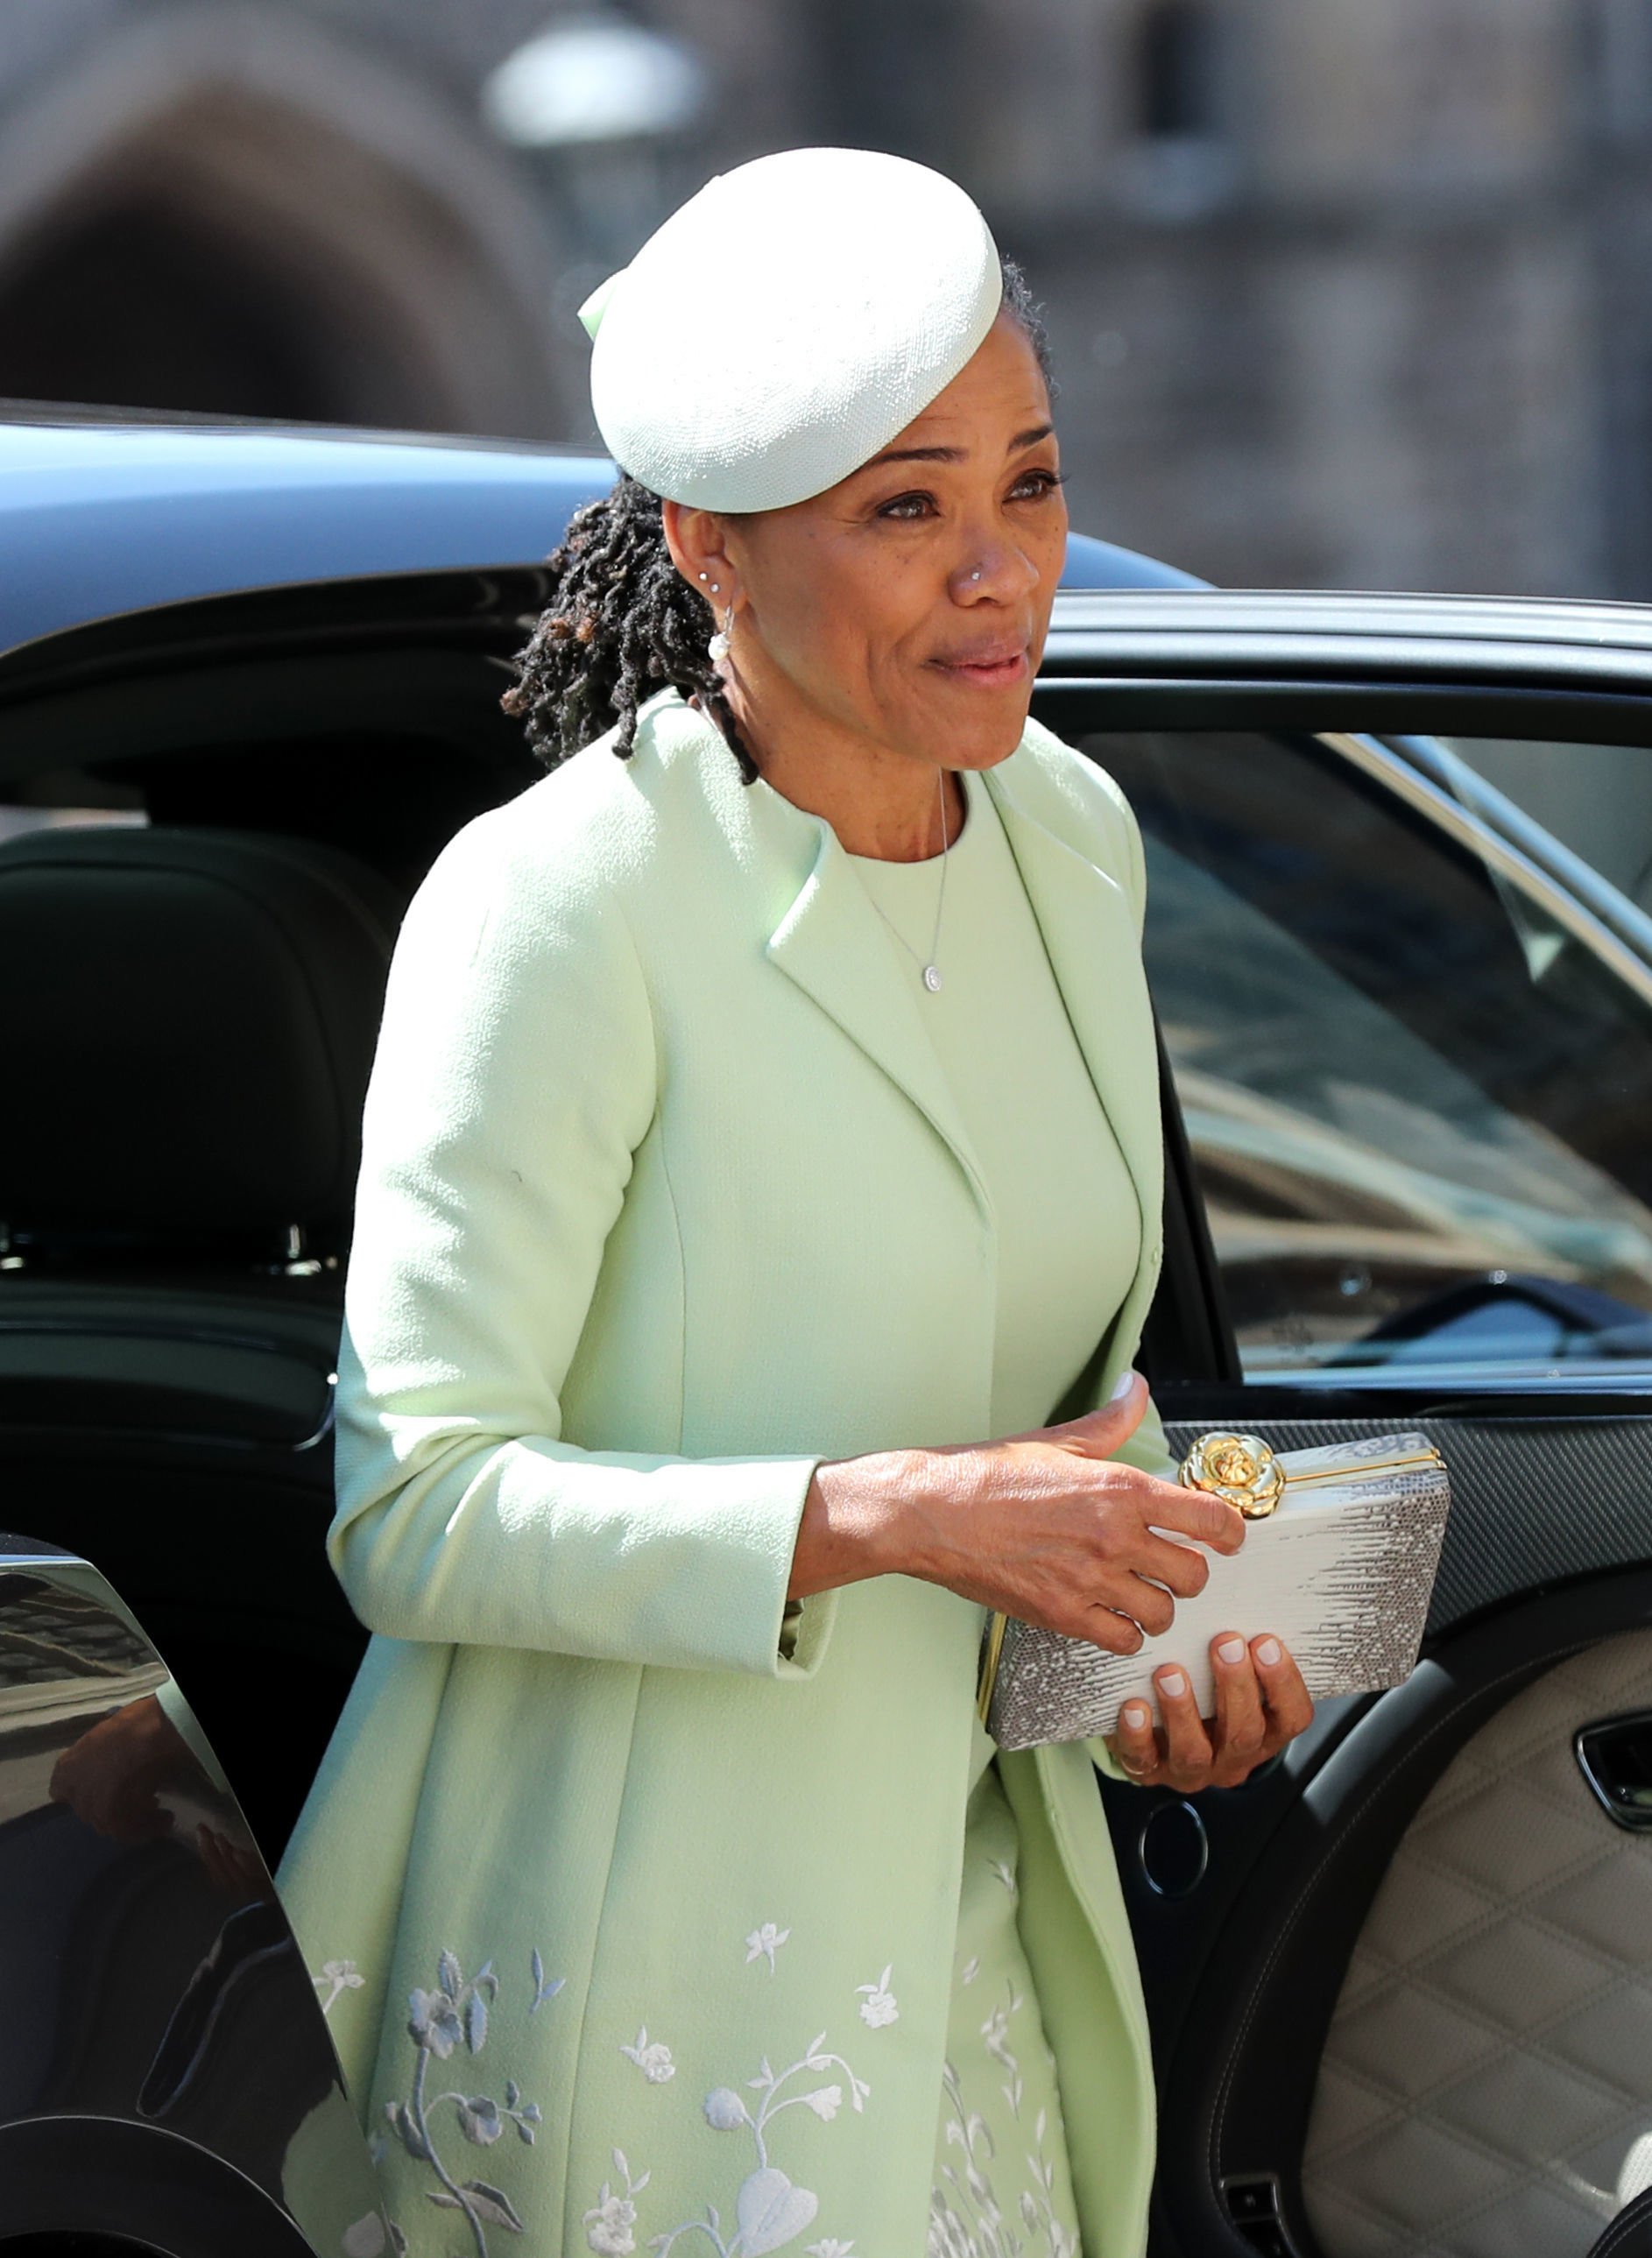 Doria Ragland arrives at St George's Chapel at Windsor Castle before the wedding of Prince Harry to Meghan Markle on May 19, 2018 in Windsor, England | Photo: Getty Images